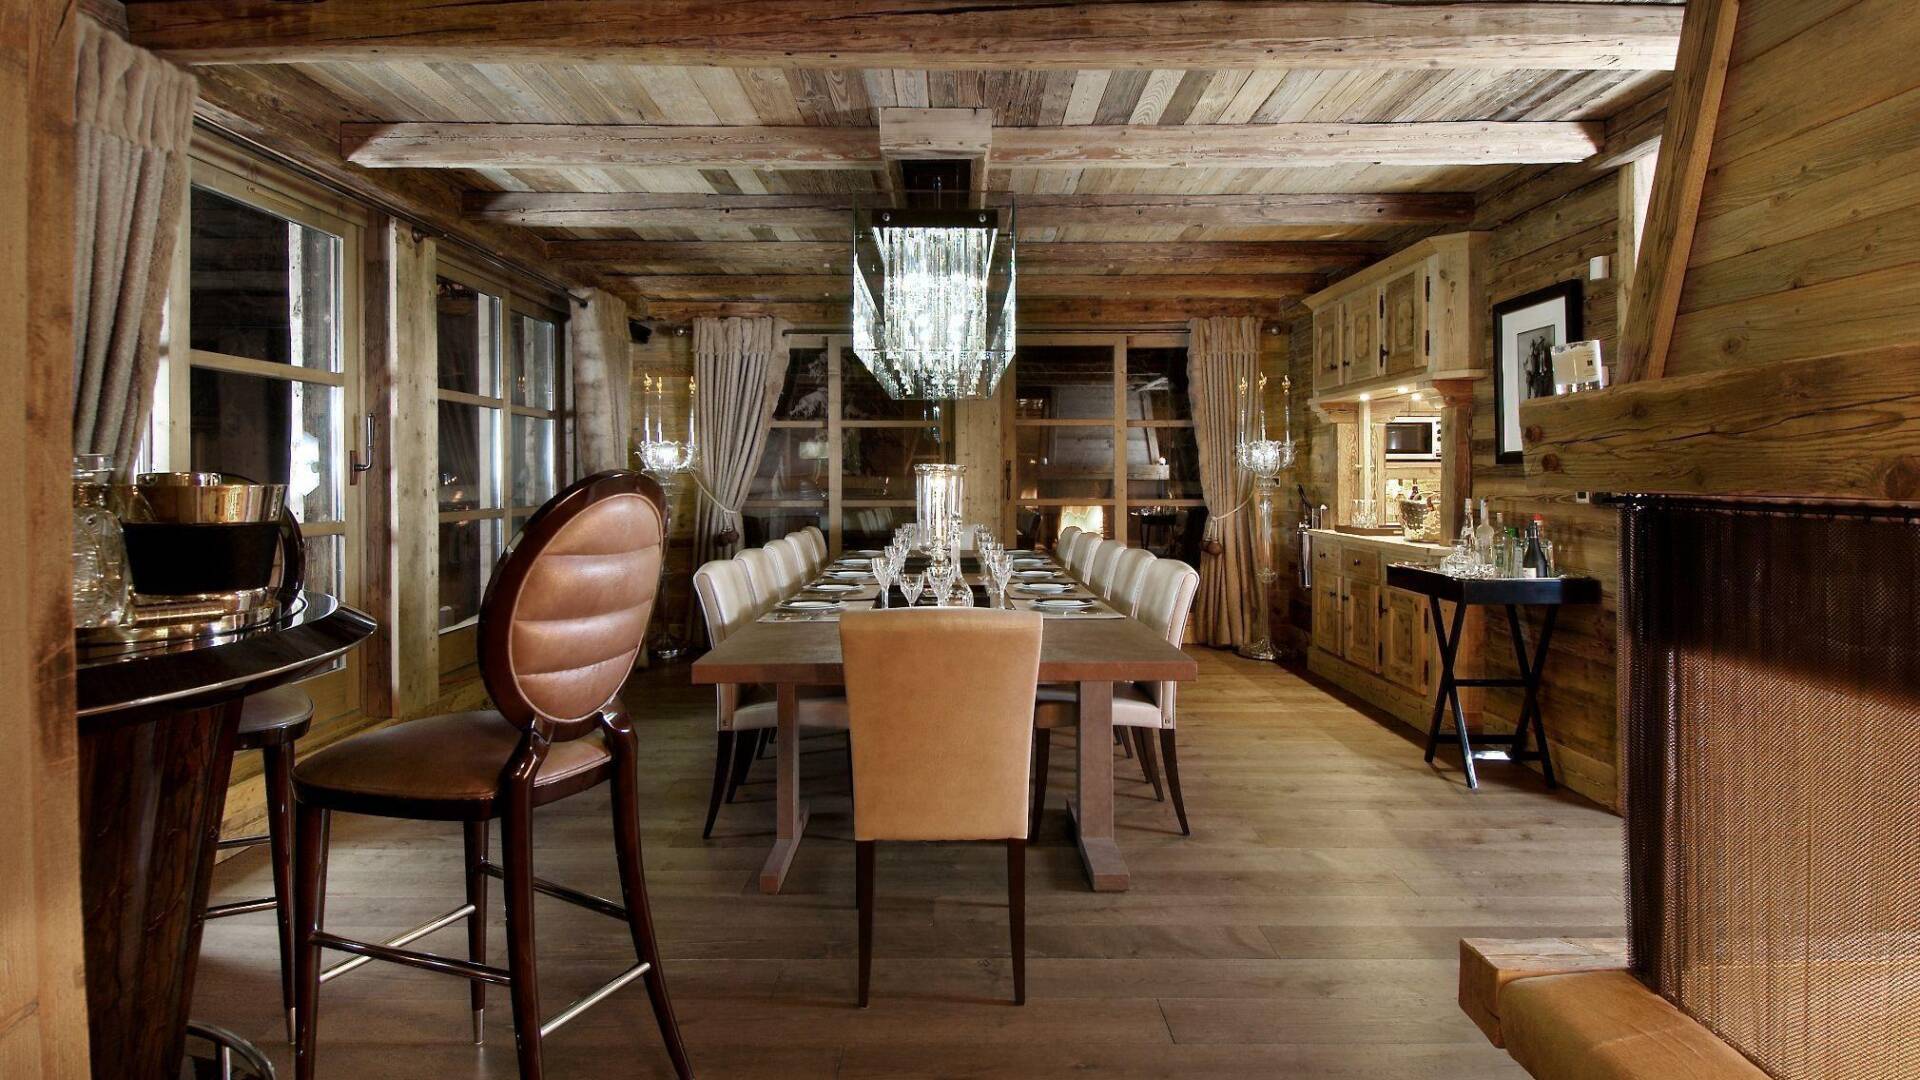 large dining area with wooden walls